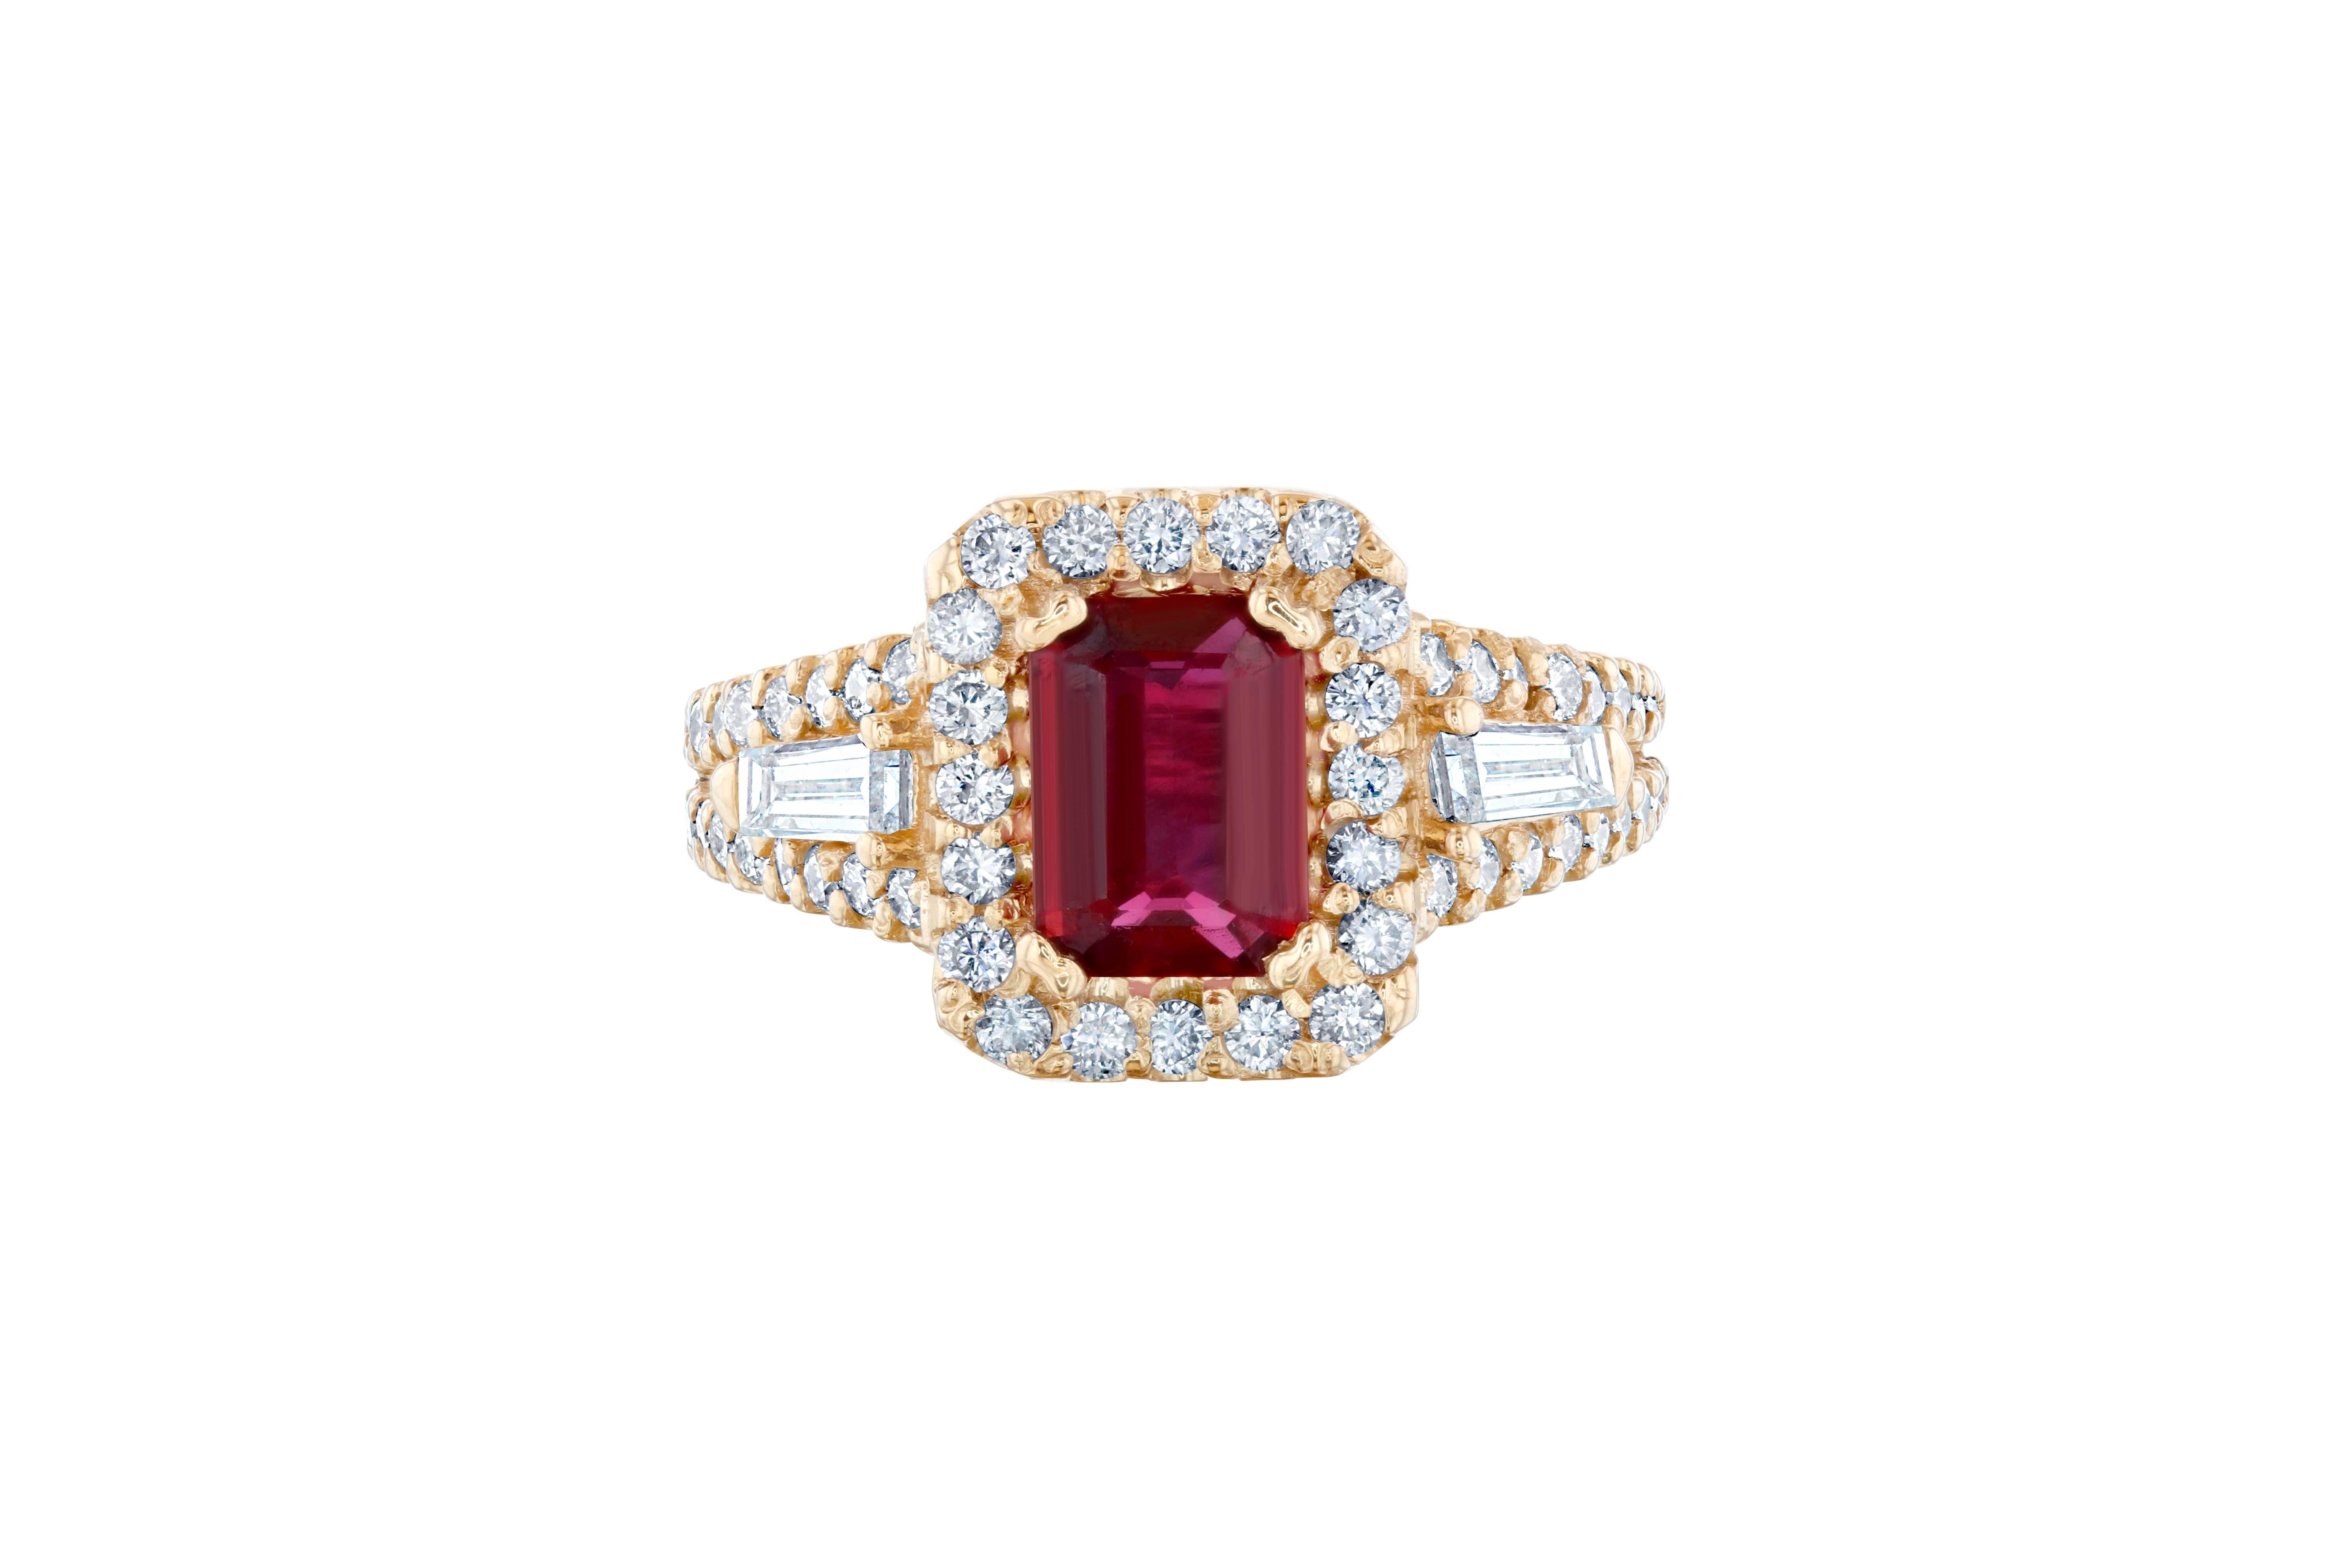 This is a unique GIA Certified Octagonal Cut Ruby and Diamond ring.  The Ruby is NATURAL, UNHEATED and is 1.49 carats. The Ruby is surrounded by 56 Round and Baguette Cut Diamonds that weigh a total of 0.85 carat (Clarity: VS2 and Color: F).  The